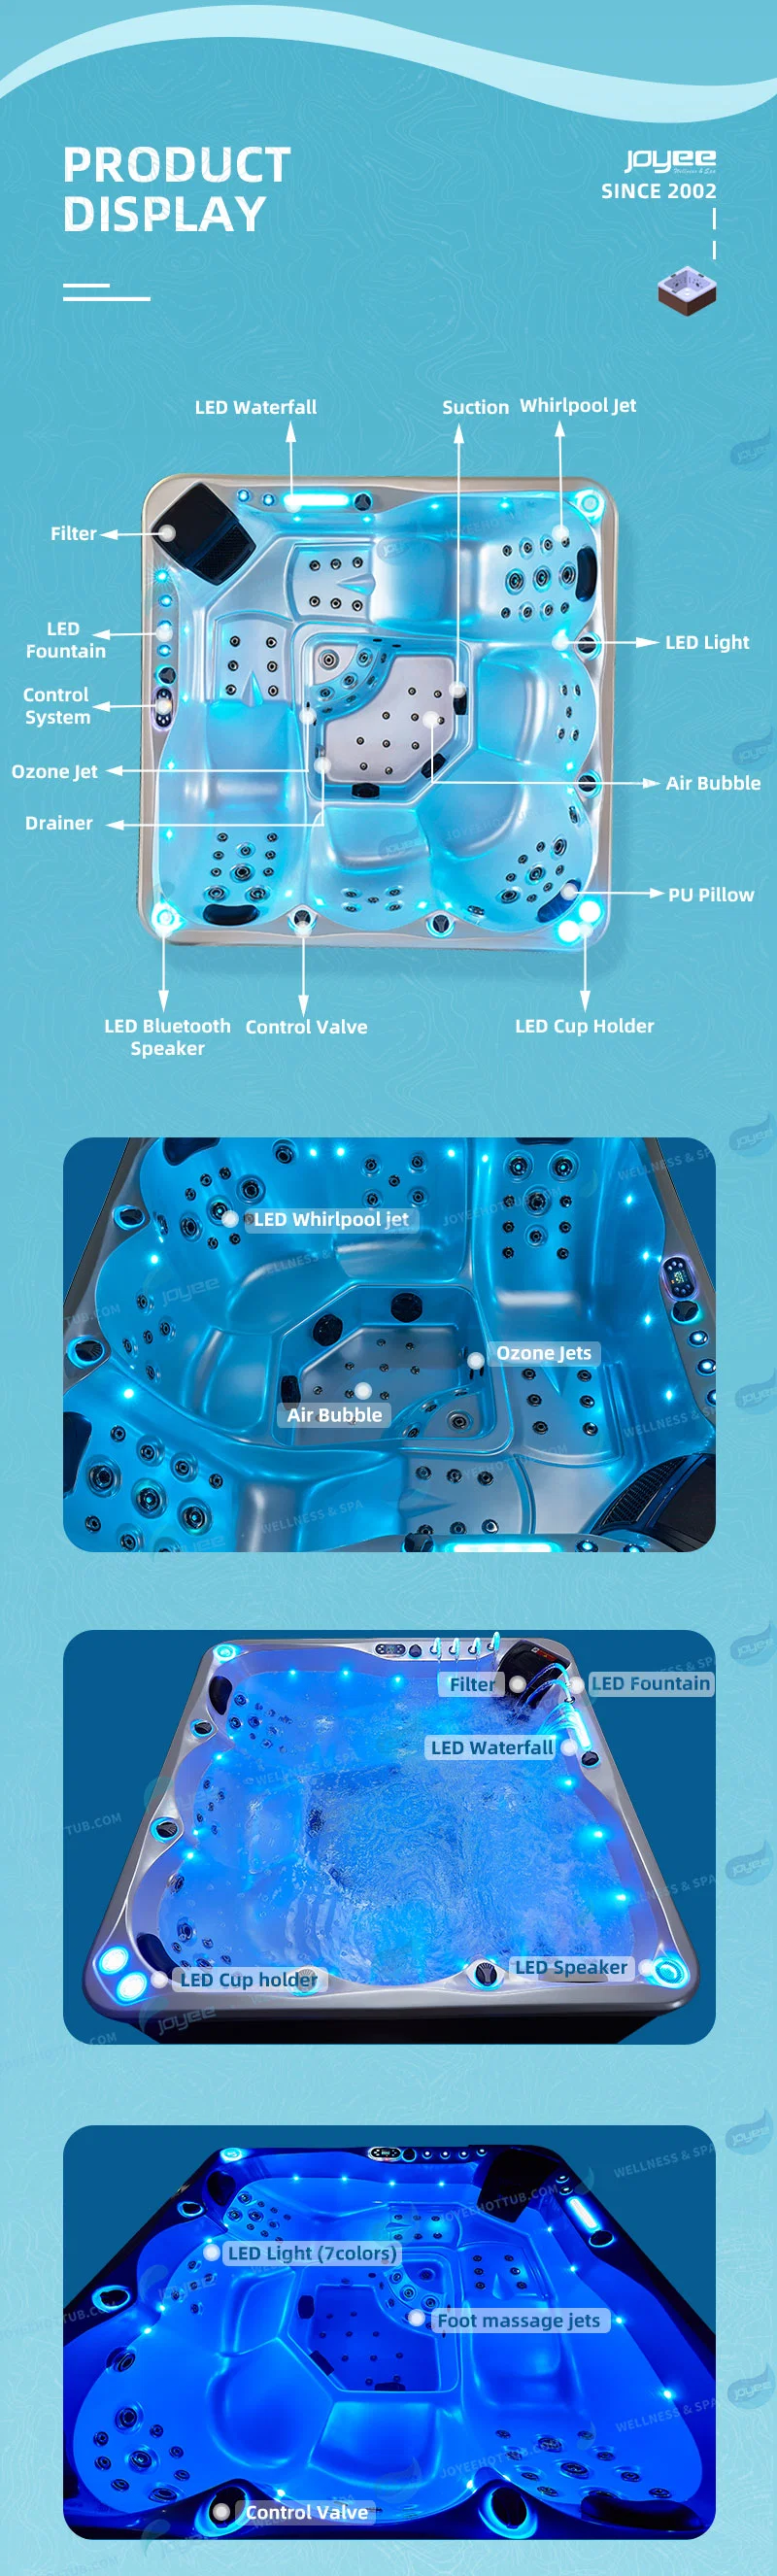 Joyee in Stock Promotion Outside 5 Person Massage Garden SPA Outdoor Whirlpool Exterior Jaccuzi Hot Tub